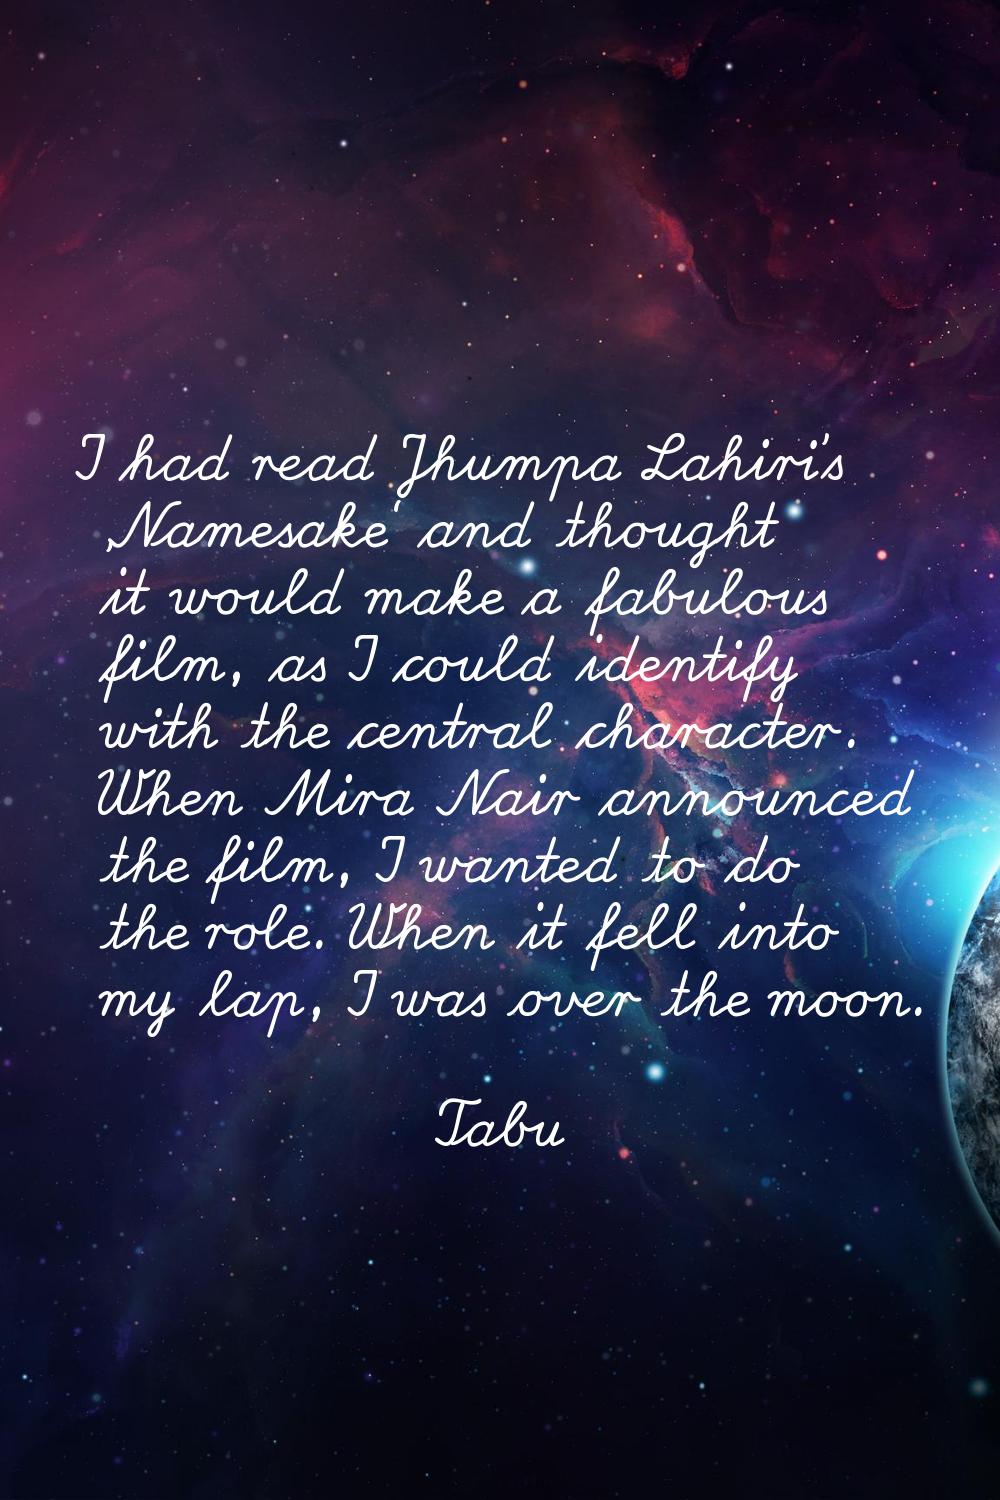 I had read Jhumpa Lahiri's 'Namesake' and thought it would make a fabulous film, as I could identif